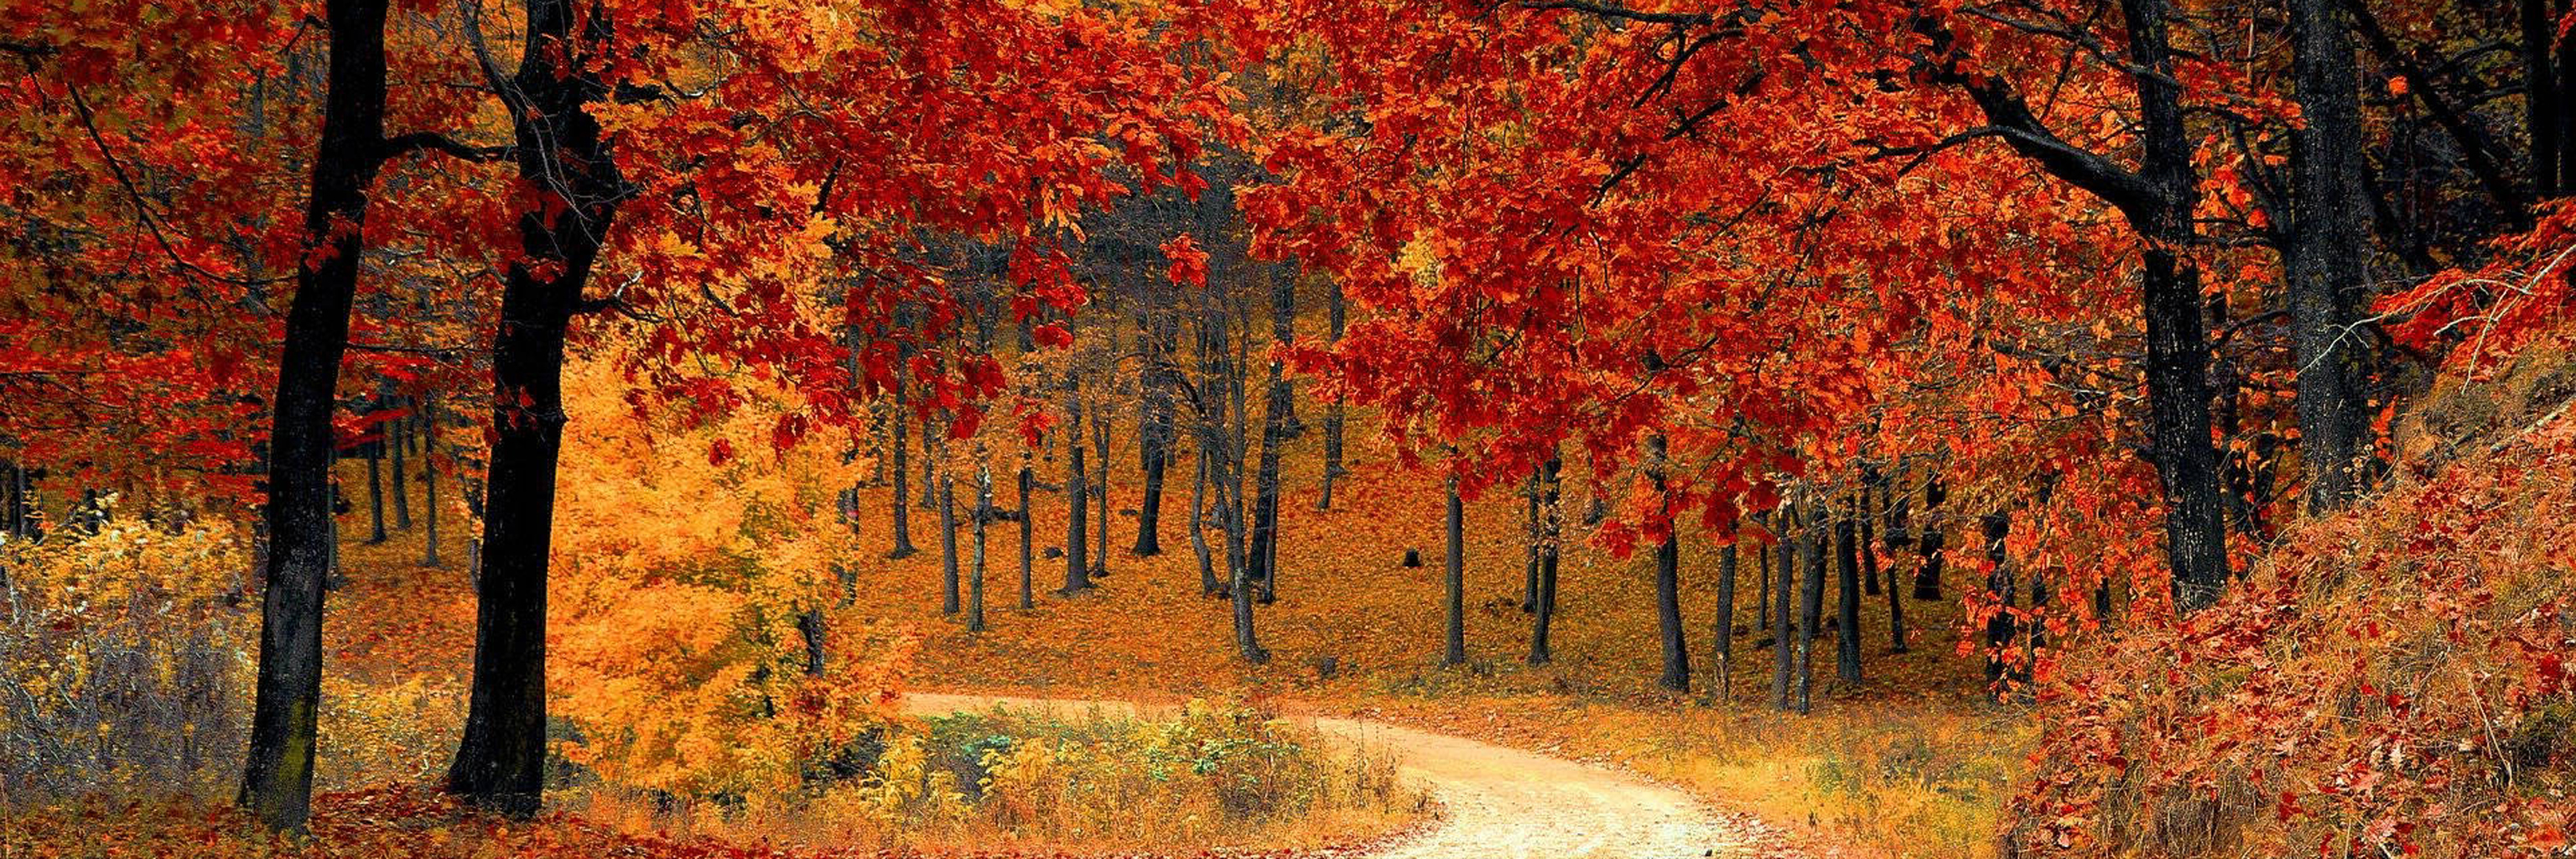 A path through the woods in fall when leaves are red and orange. 